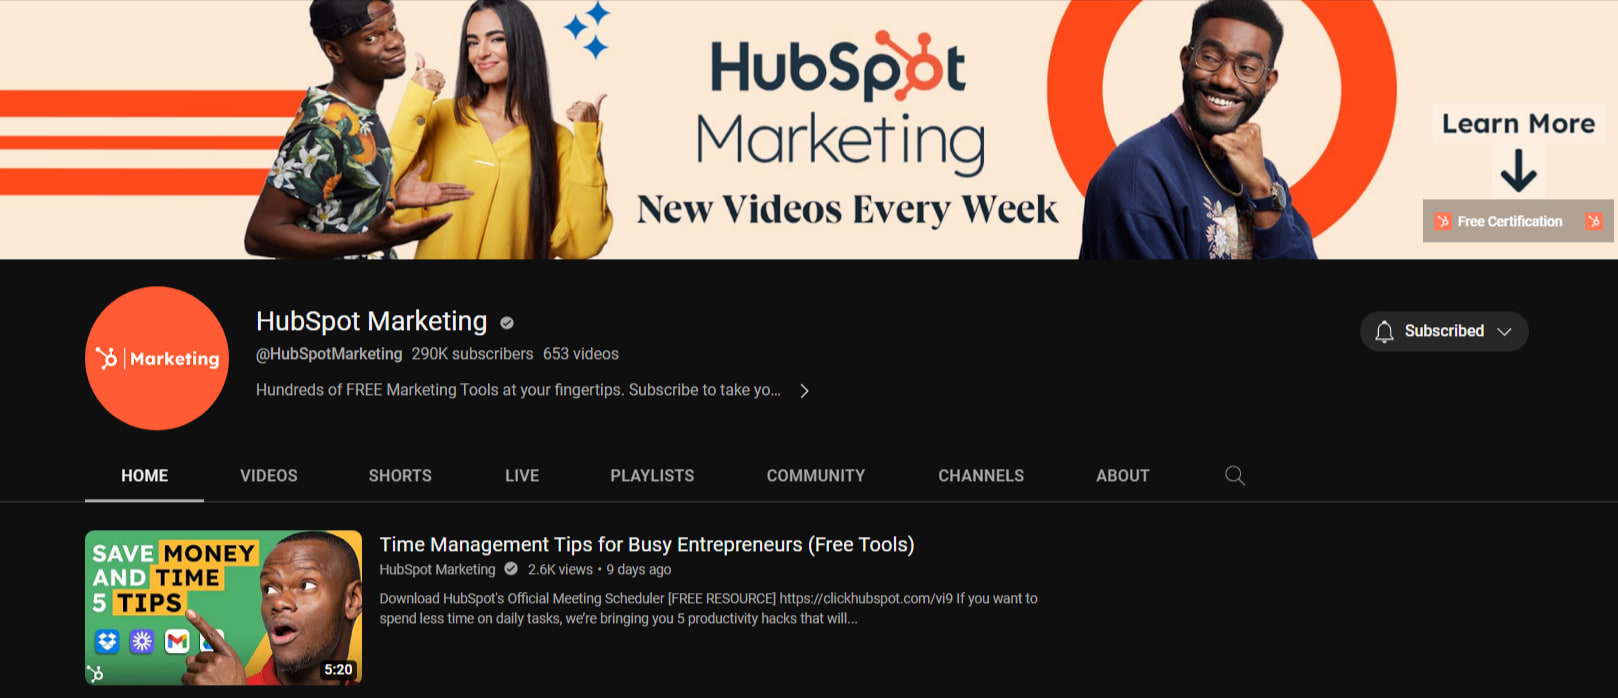 HubSpot’s YouTube channel